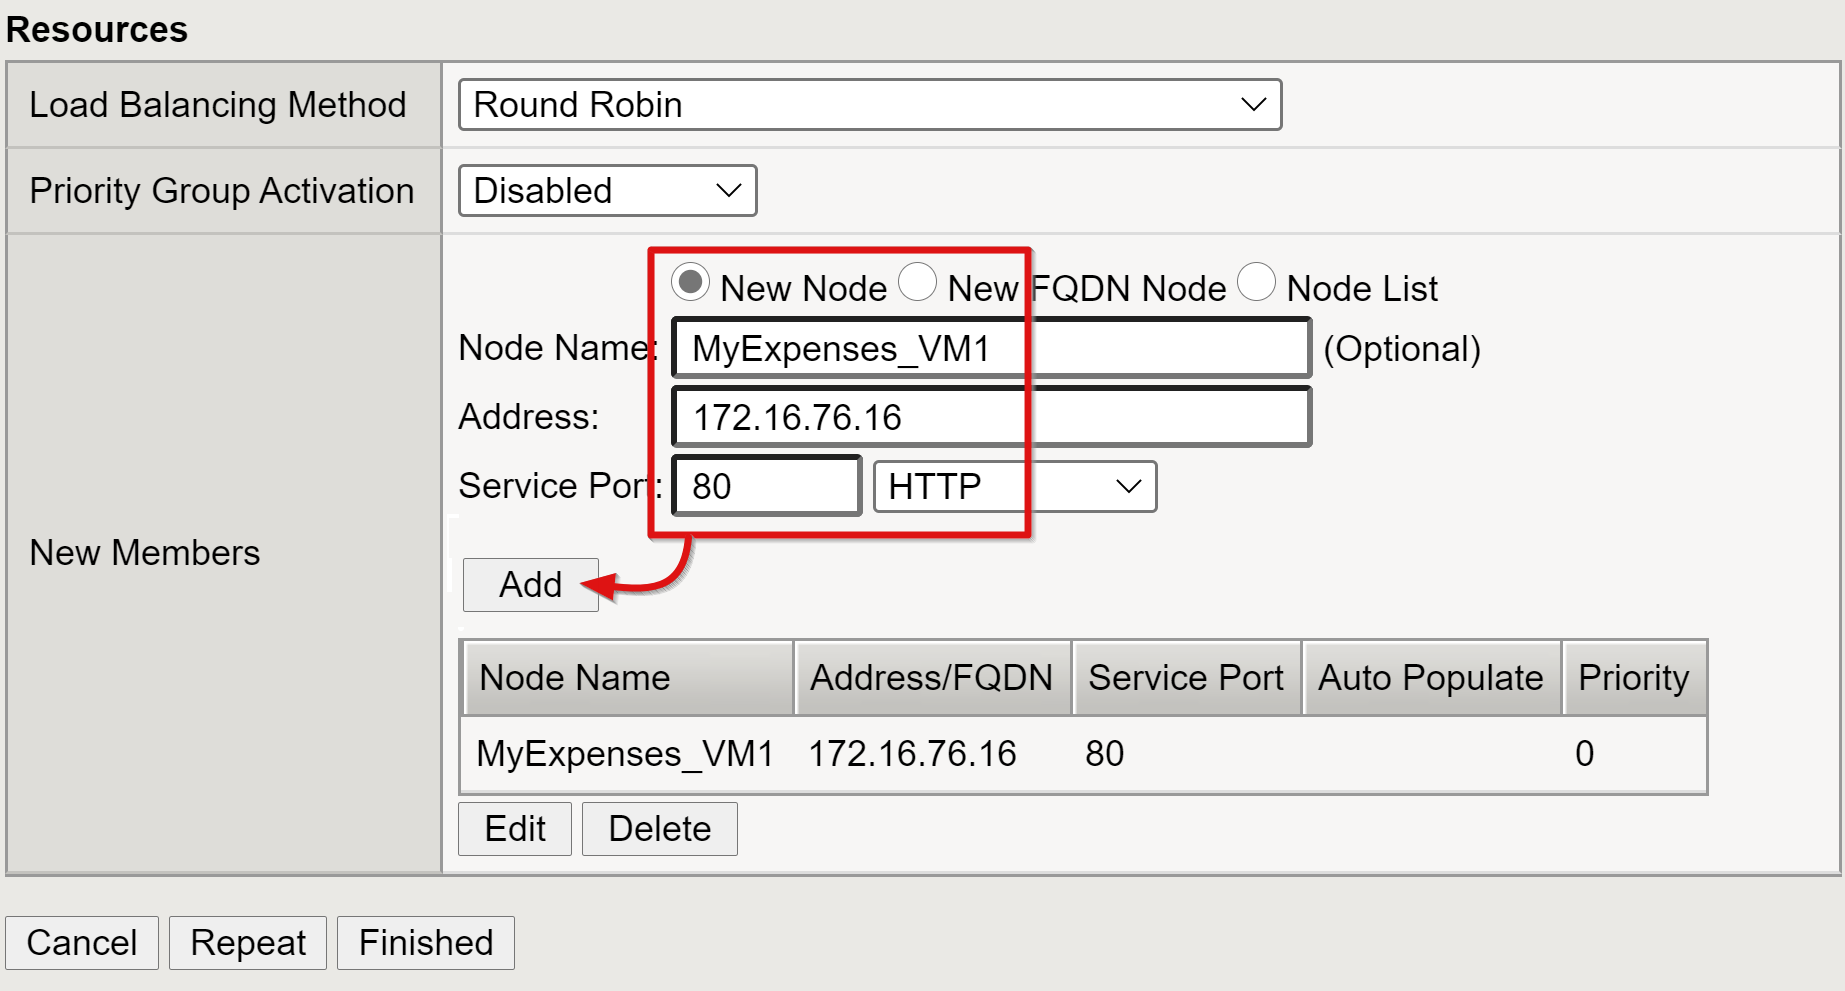 Screenshot of Node Name, Address, and Service Port entries and the Add option.